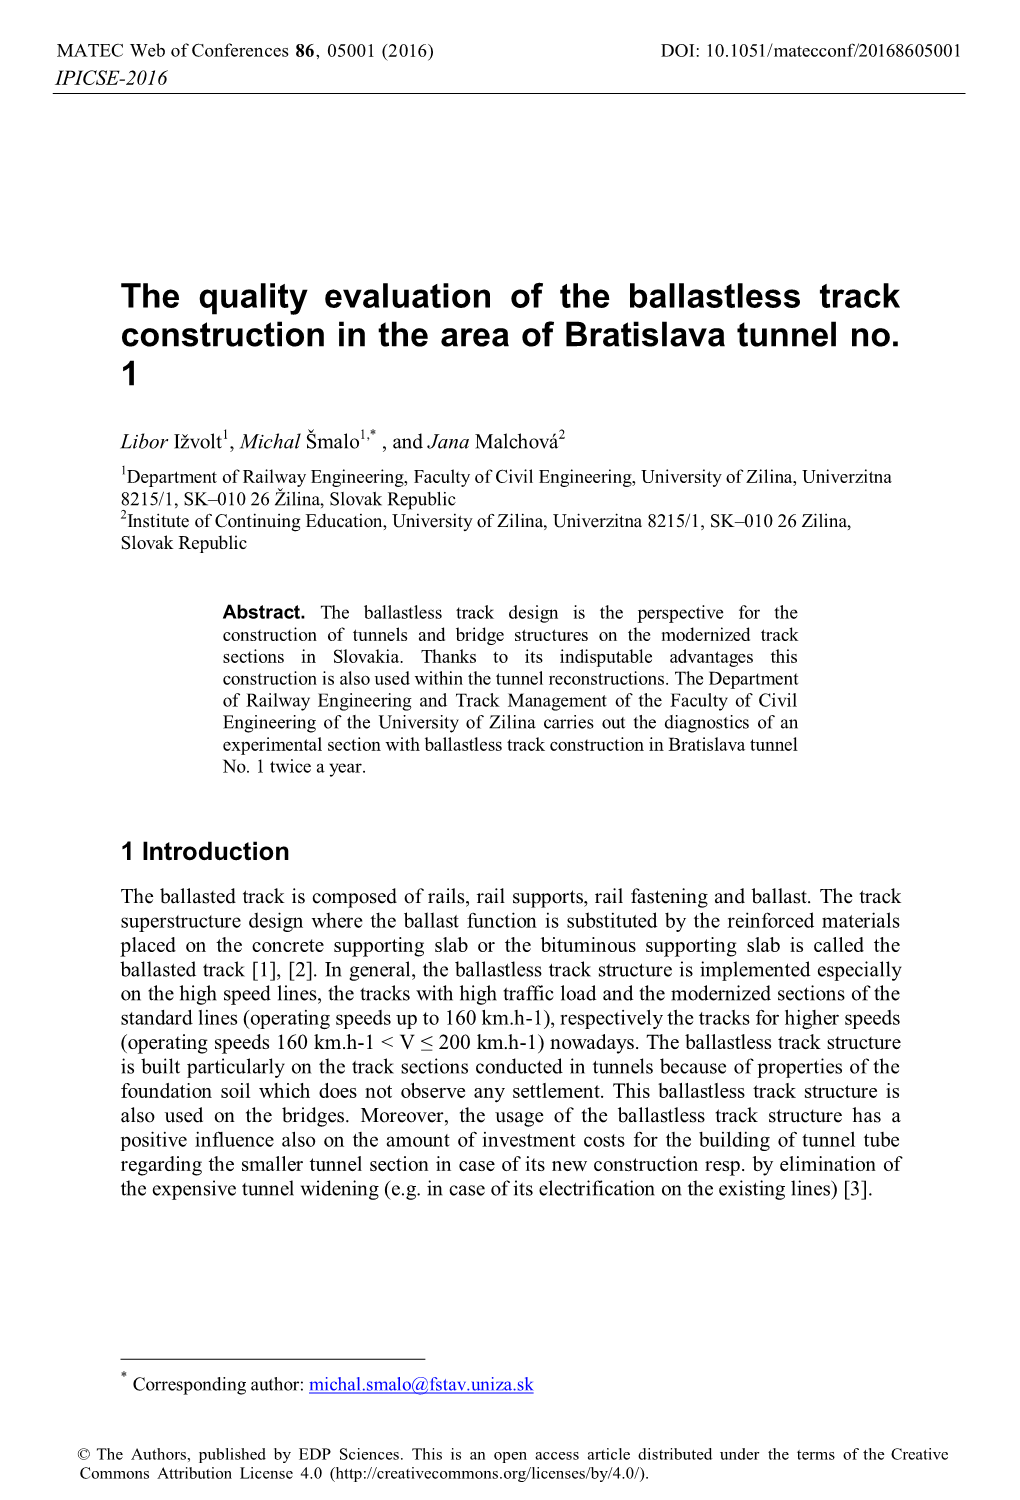 The Quality Evaluation of the Ballastless Track Construction in the Area of Bratislava Tunnel No